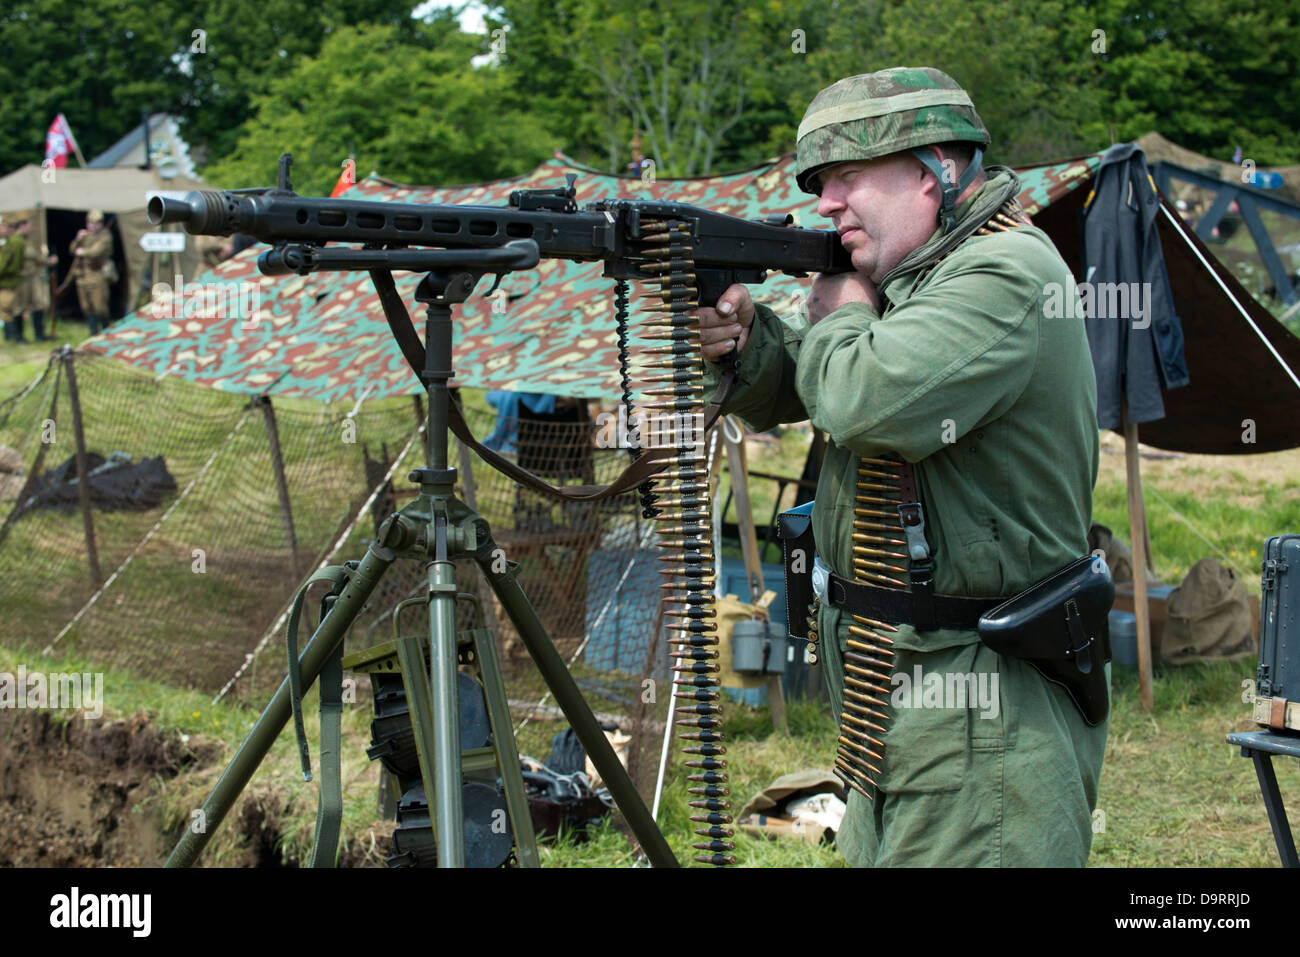 Military warfare re-enactment at the Overlord show, Waterlooville, Hampshire, UK Stock Photo